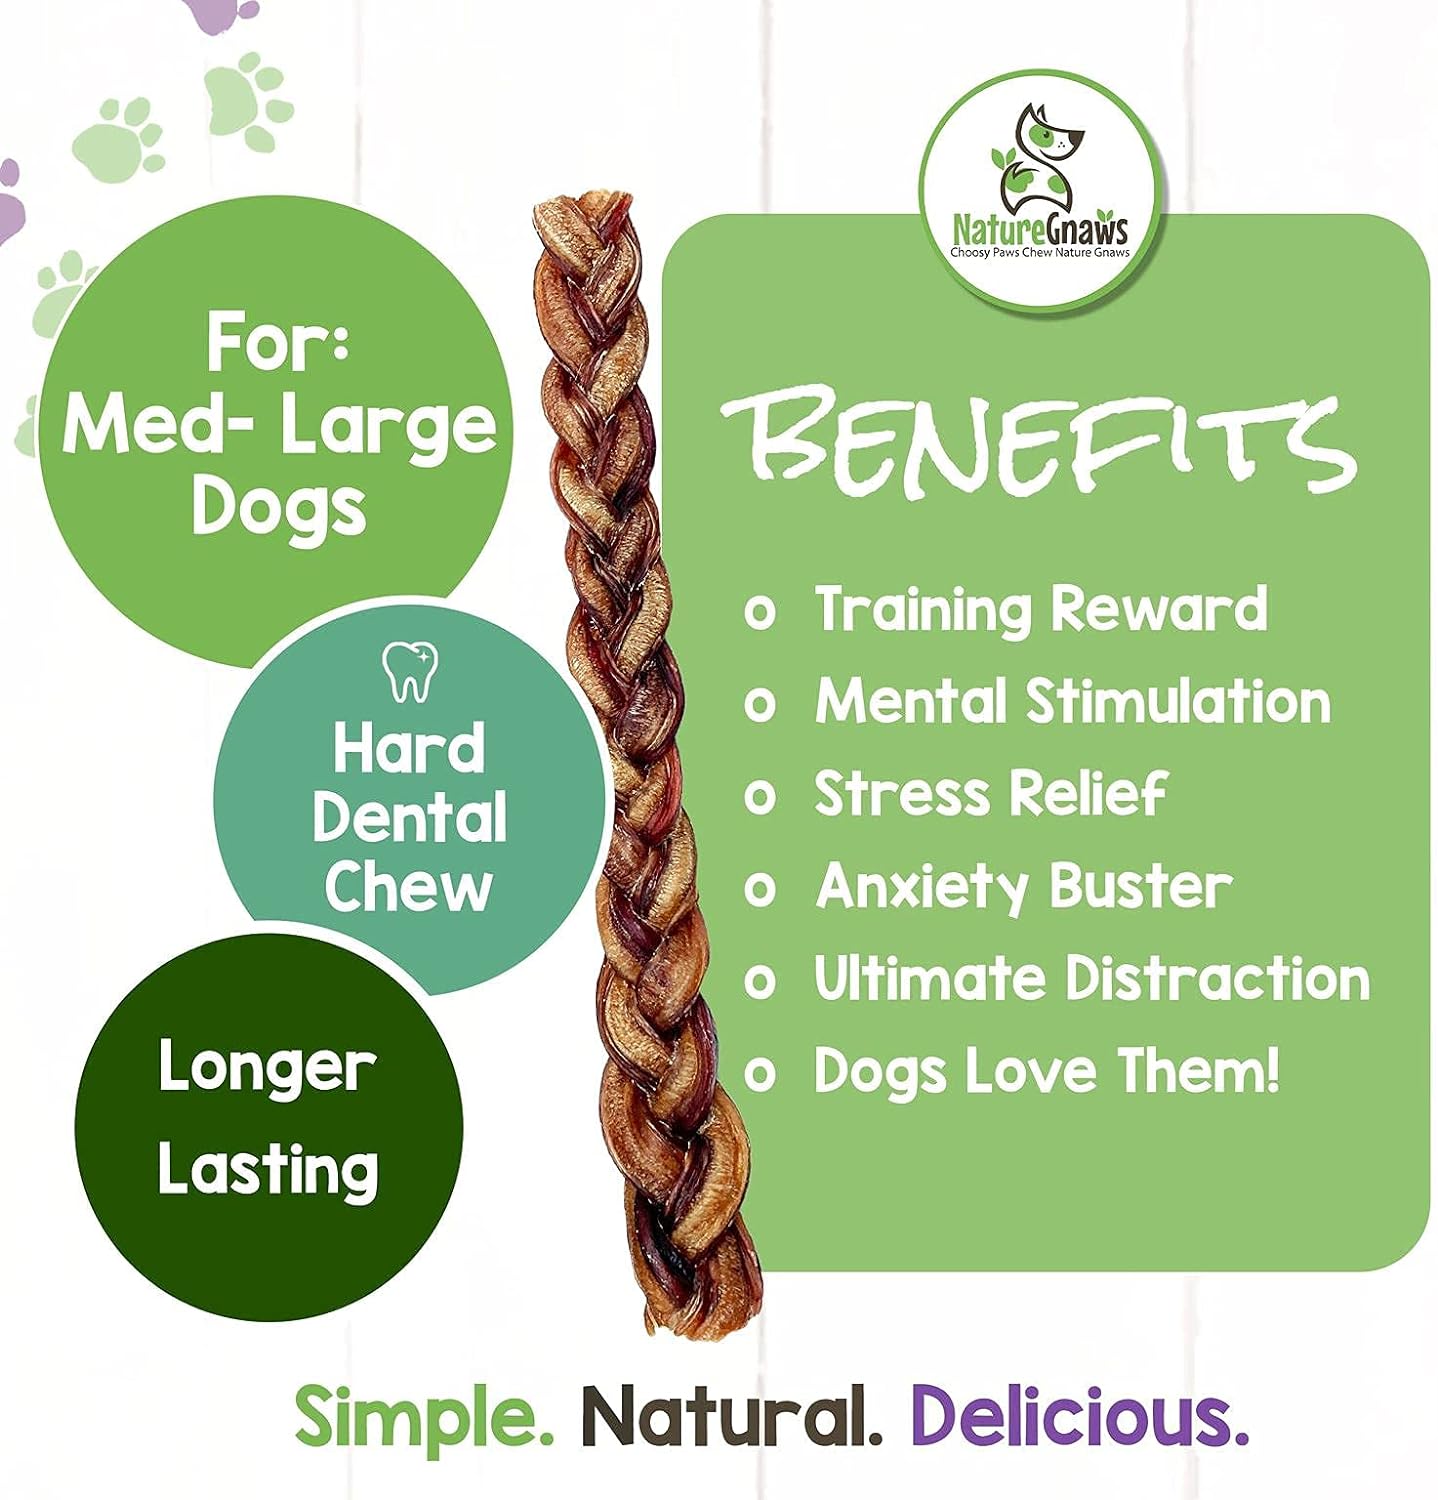 Nature Gnaws - Braided Bully Sticks for Dogs - Premium Natural Beef Dental Bones - Long Lasting Dog Chew Treats for Aggressive Chewers - Rawhide Free - 12 Inches : Pet Supplies